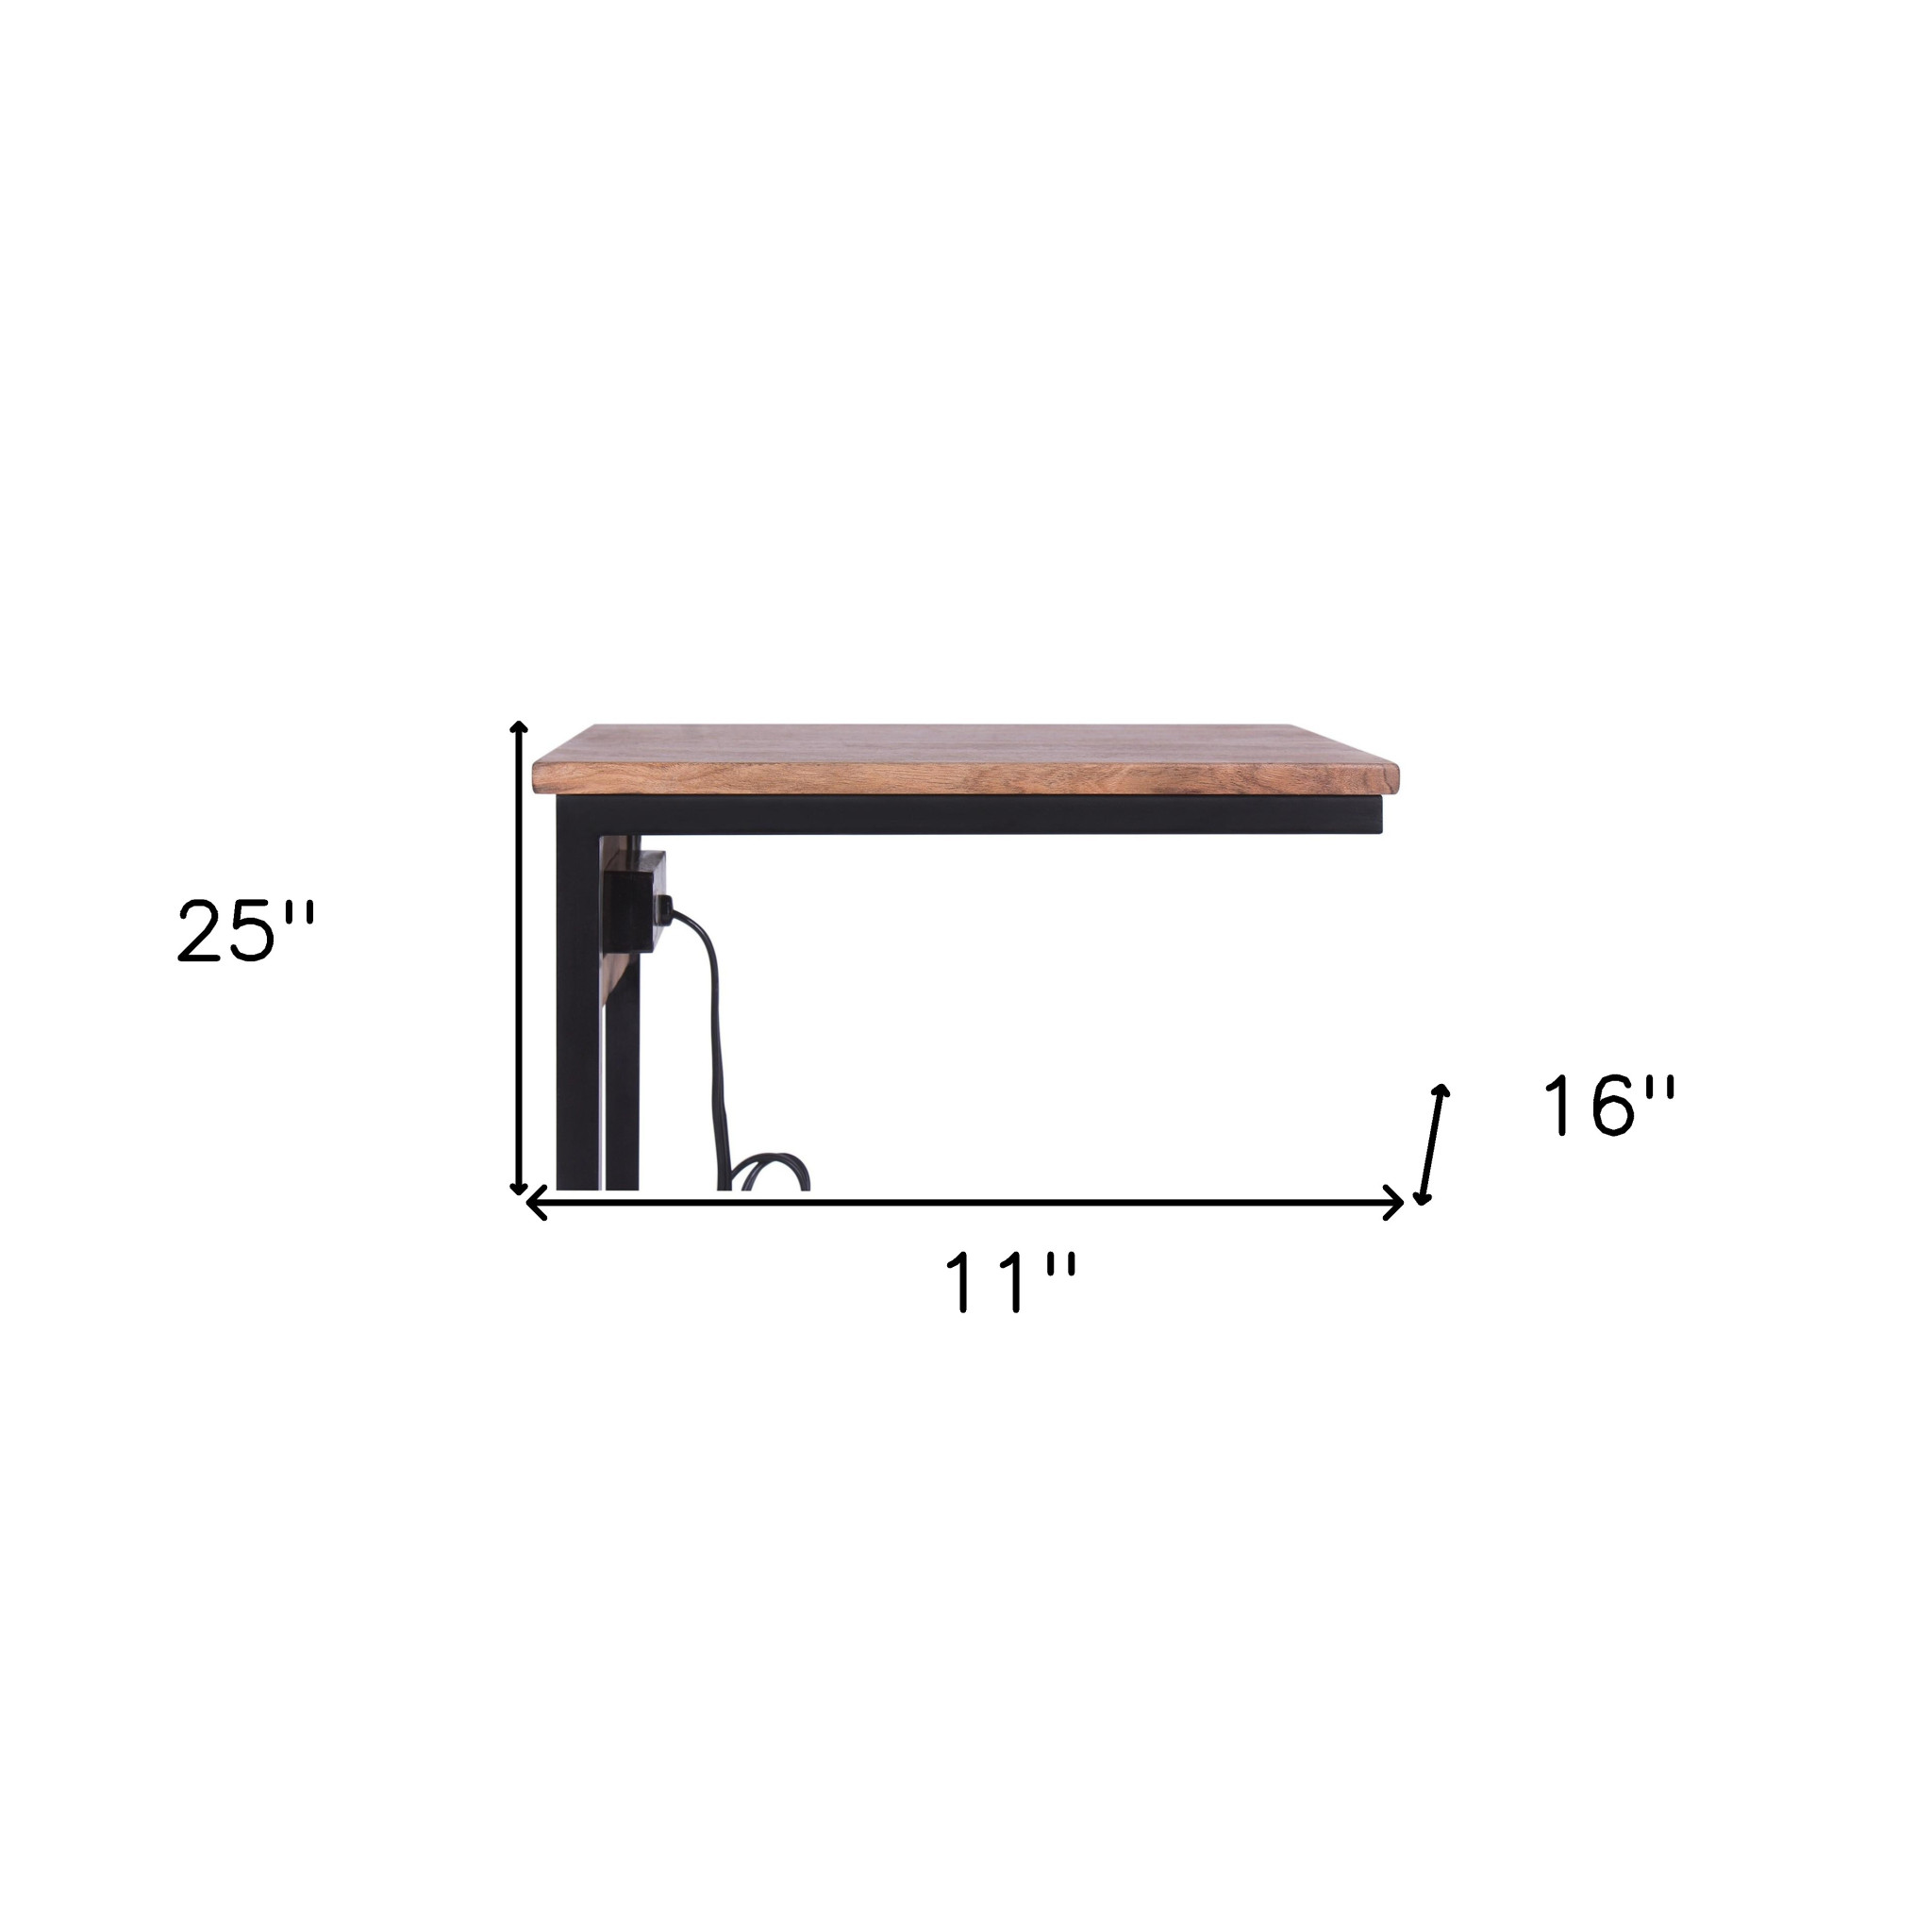 Modern Duo Tone Wood and Metal End or Side Table with USB